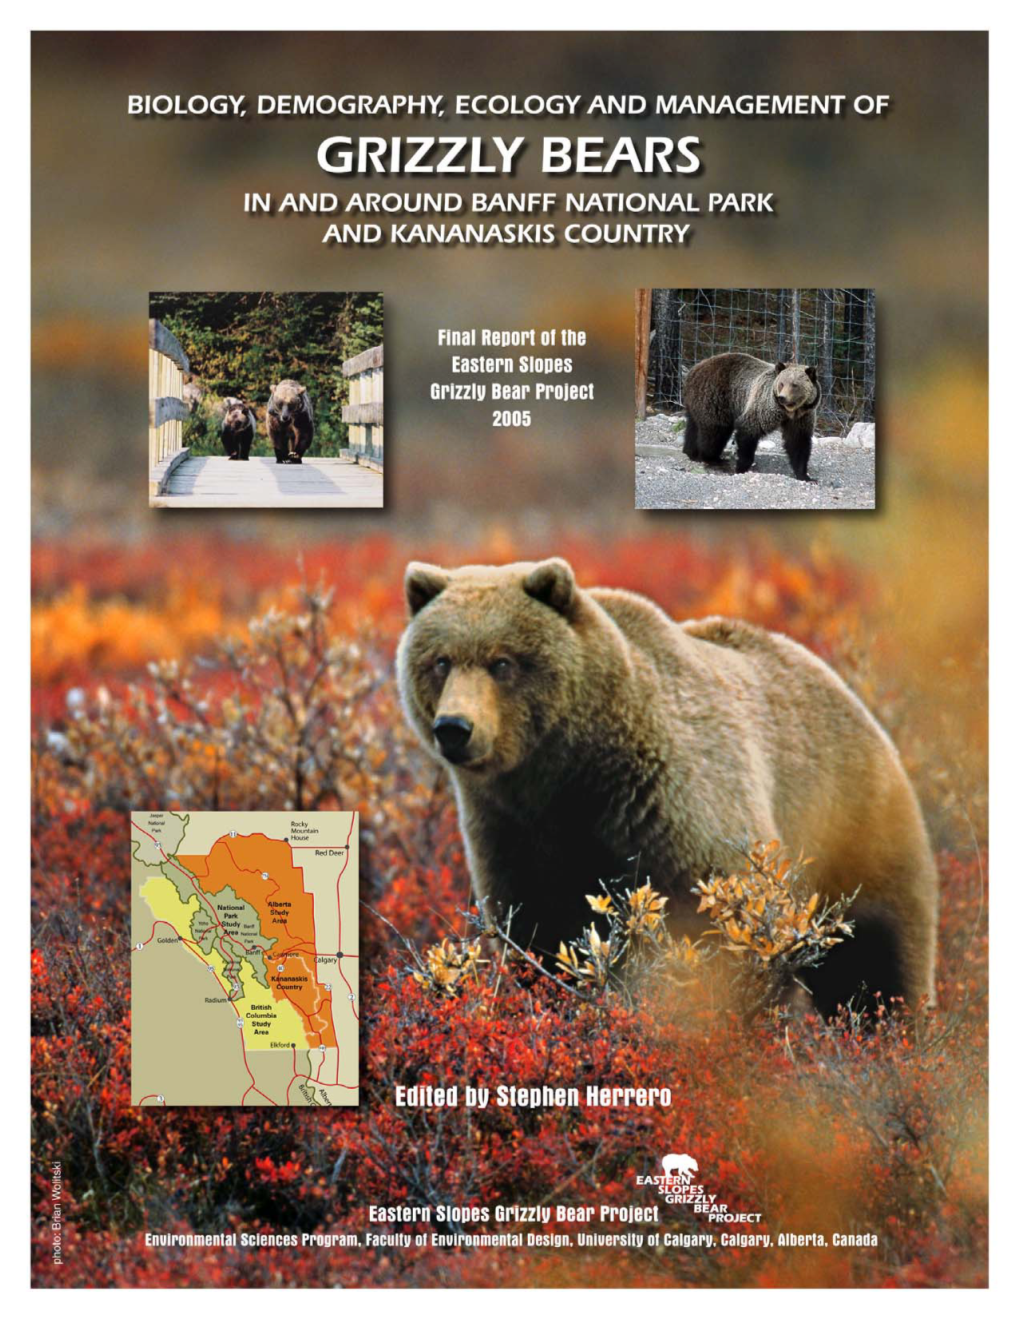 Eastern Slopes Grizzly Bear Project